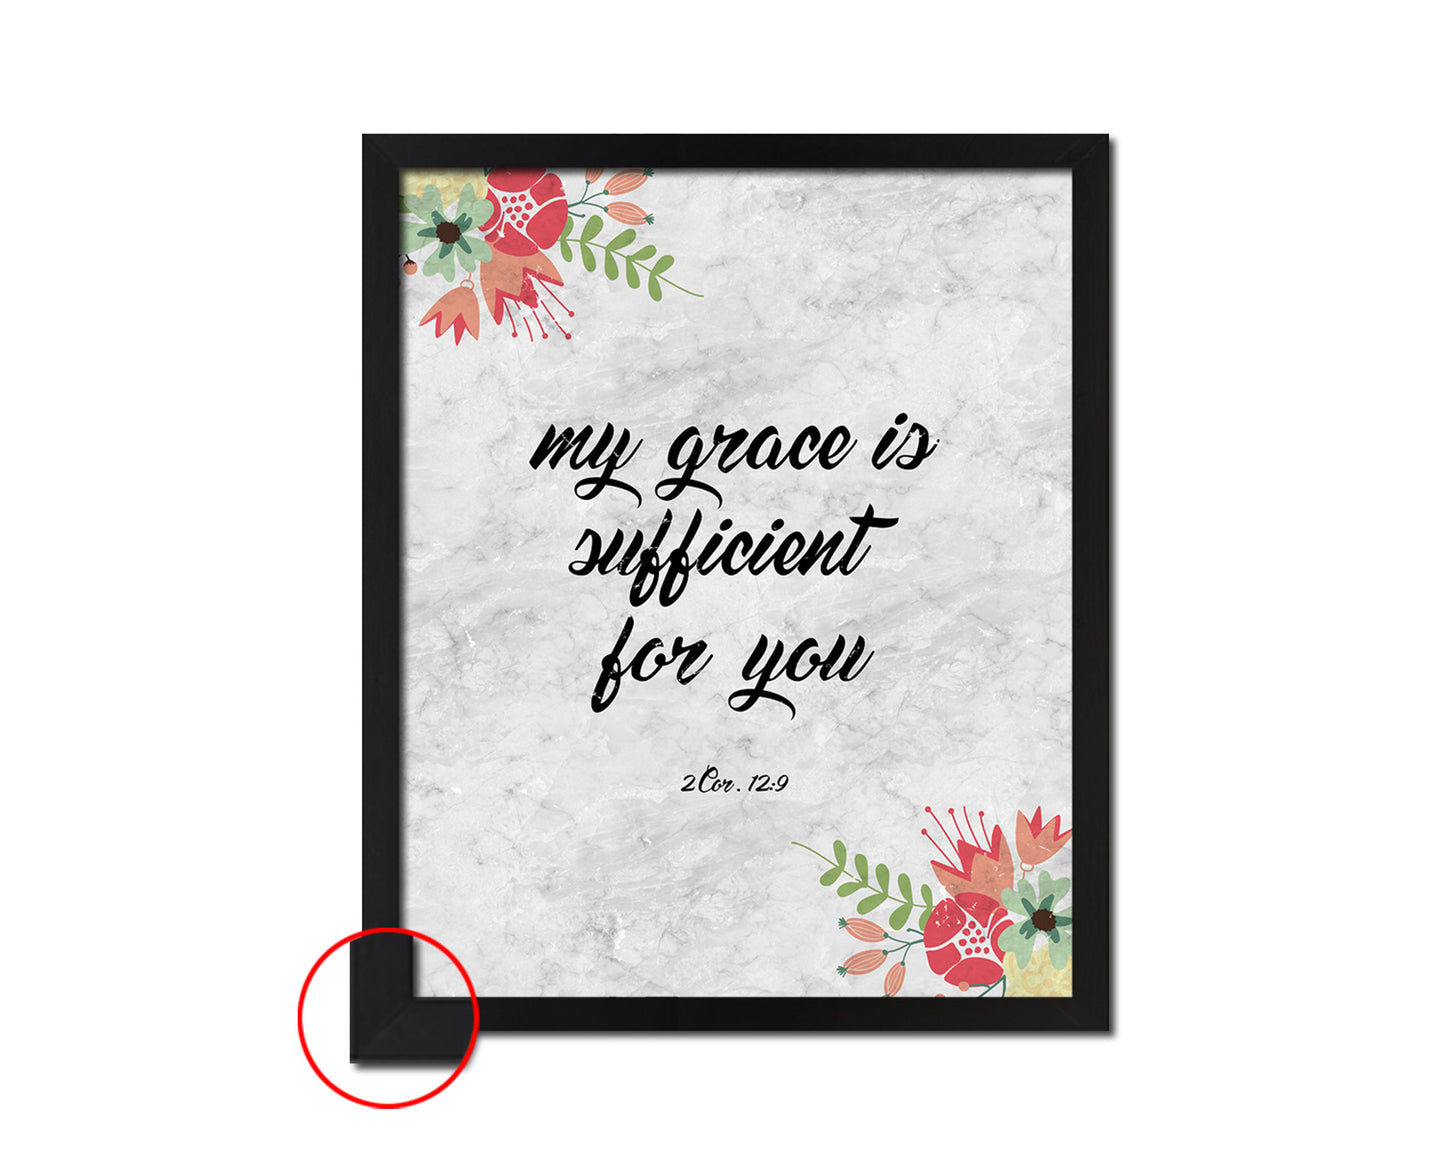 My grace is sufficient for you, 2 Corinthians 12:9 Bible Scripture Verse Framed Print Wall Art Decor Gifts